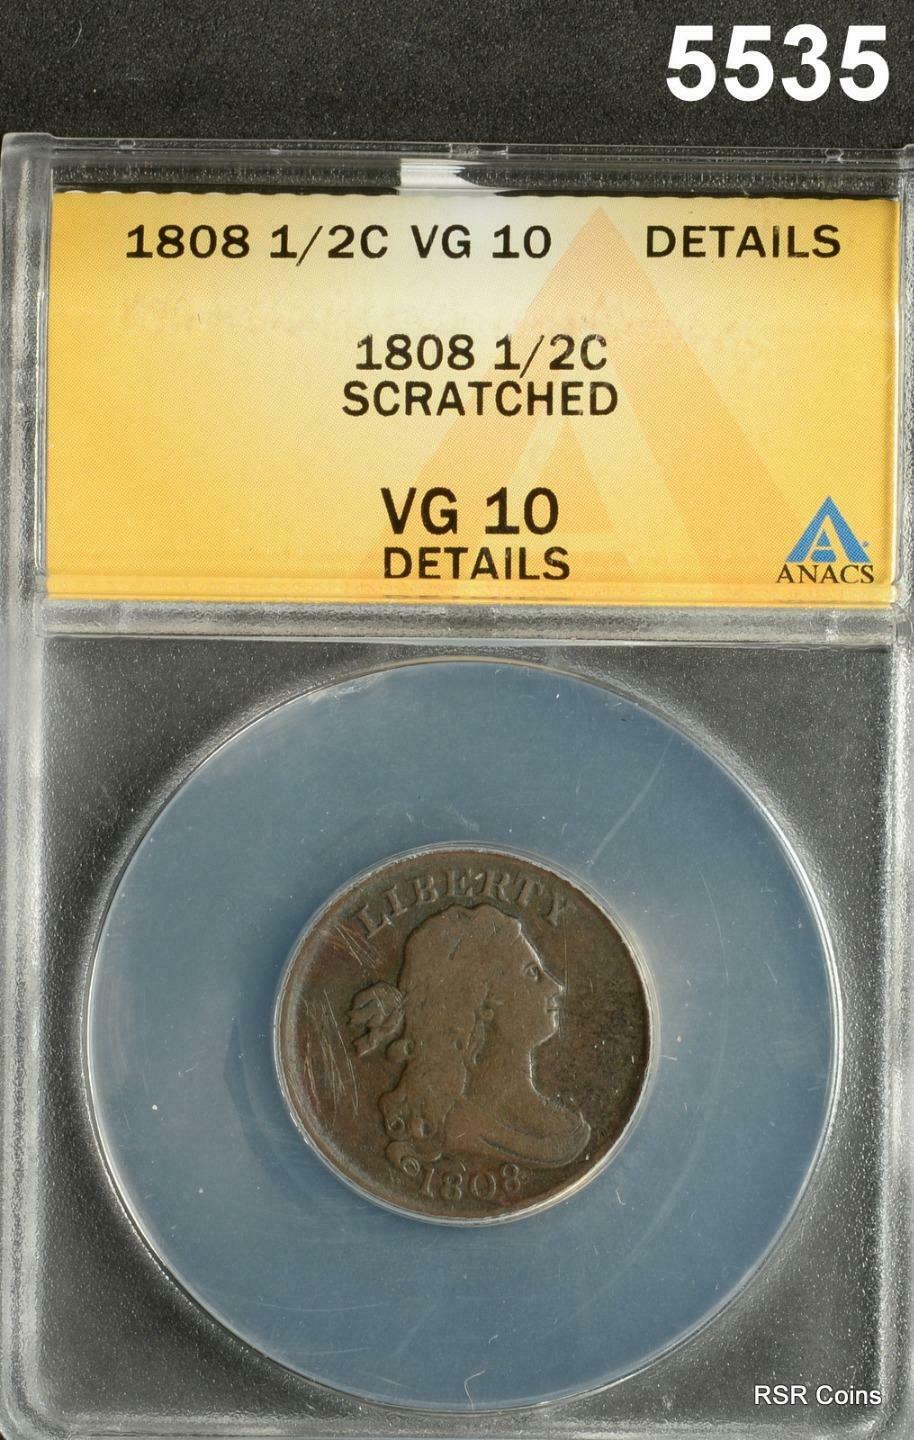 1808 HALF CENT ANACS CERTIFIED VG10 DETAILS SCRATCHED #5535